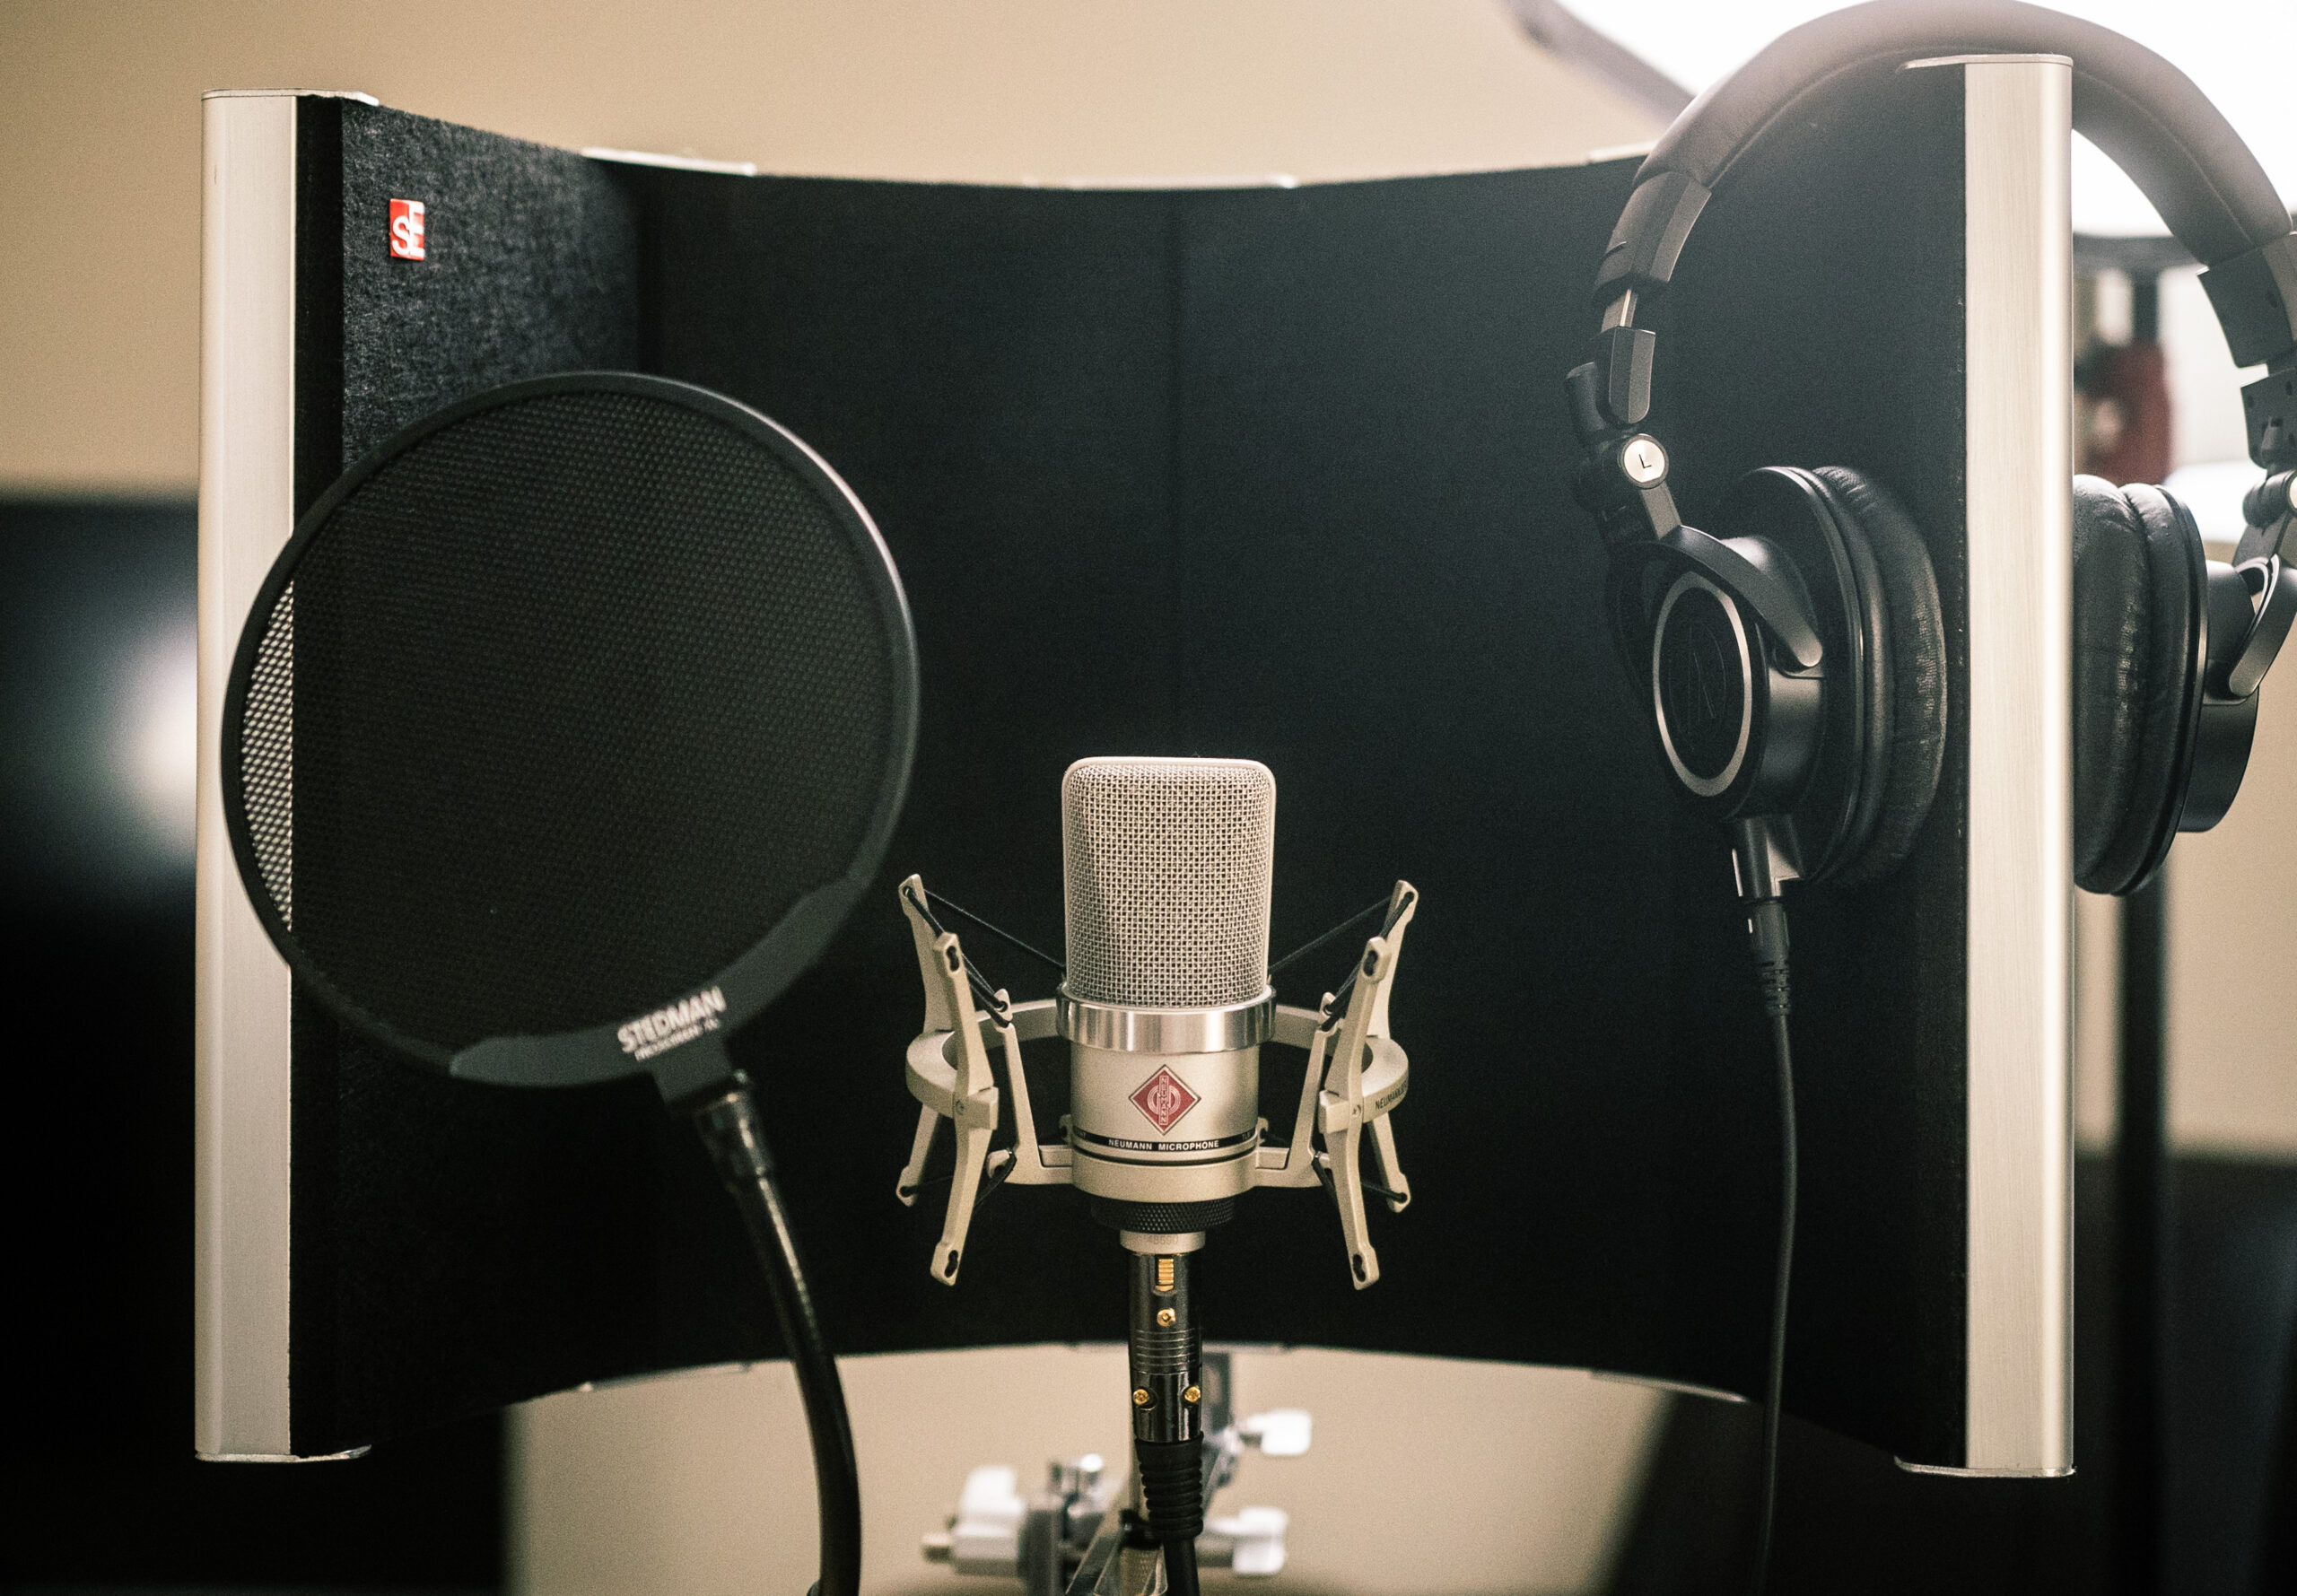 Recording microphone, sound baffle and headphones on a white tabletop.